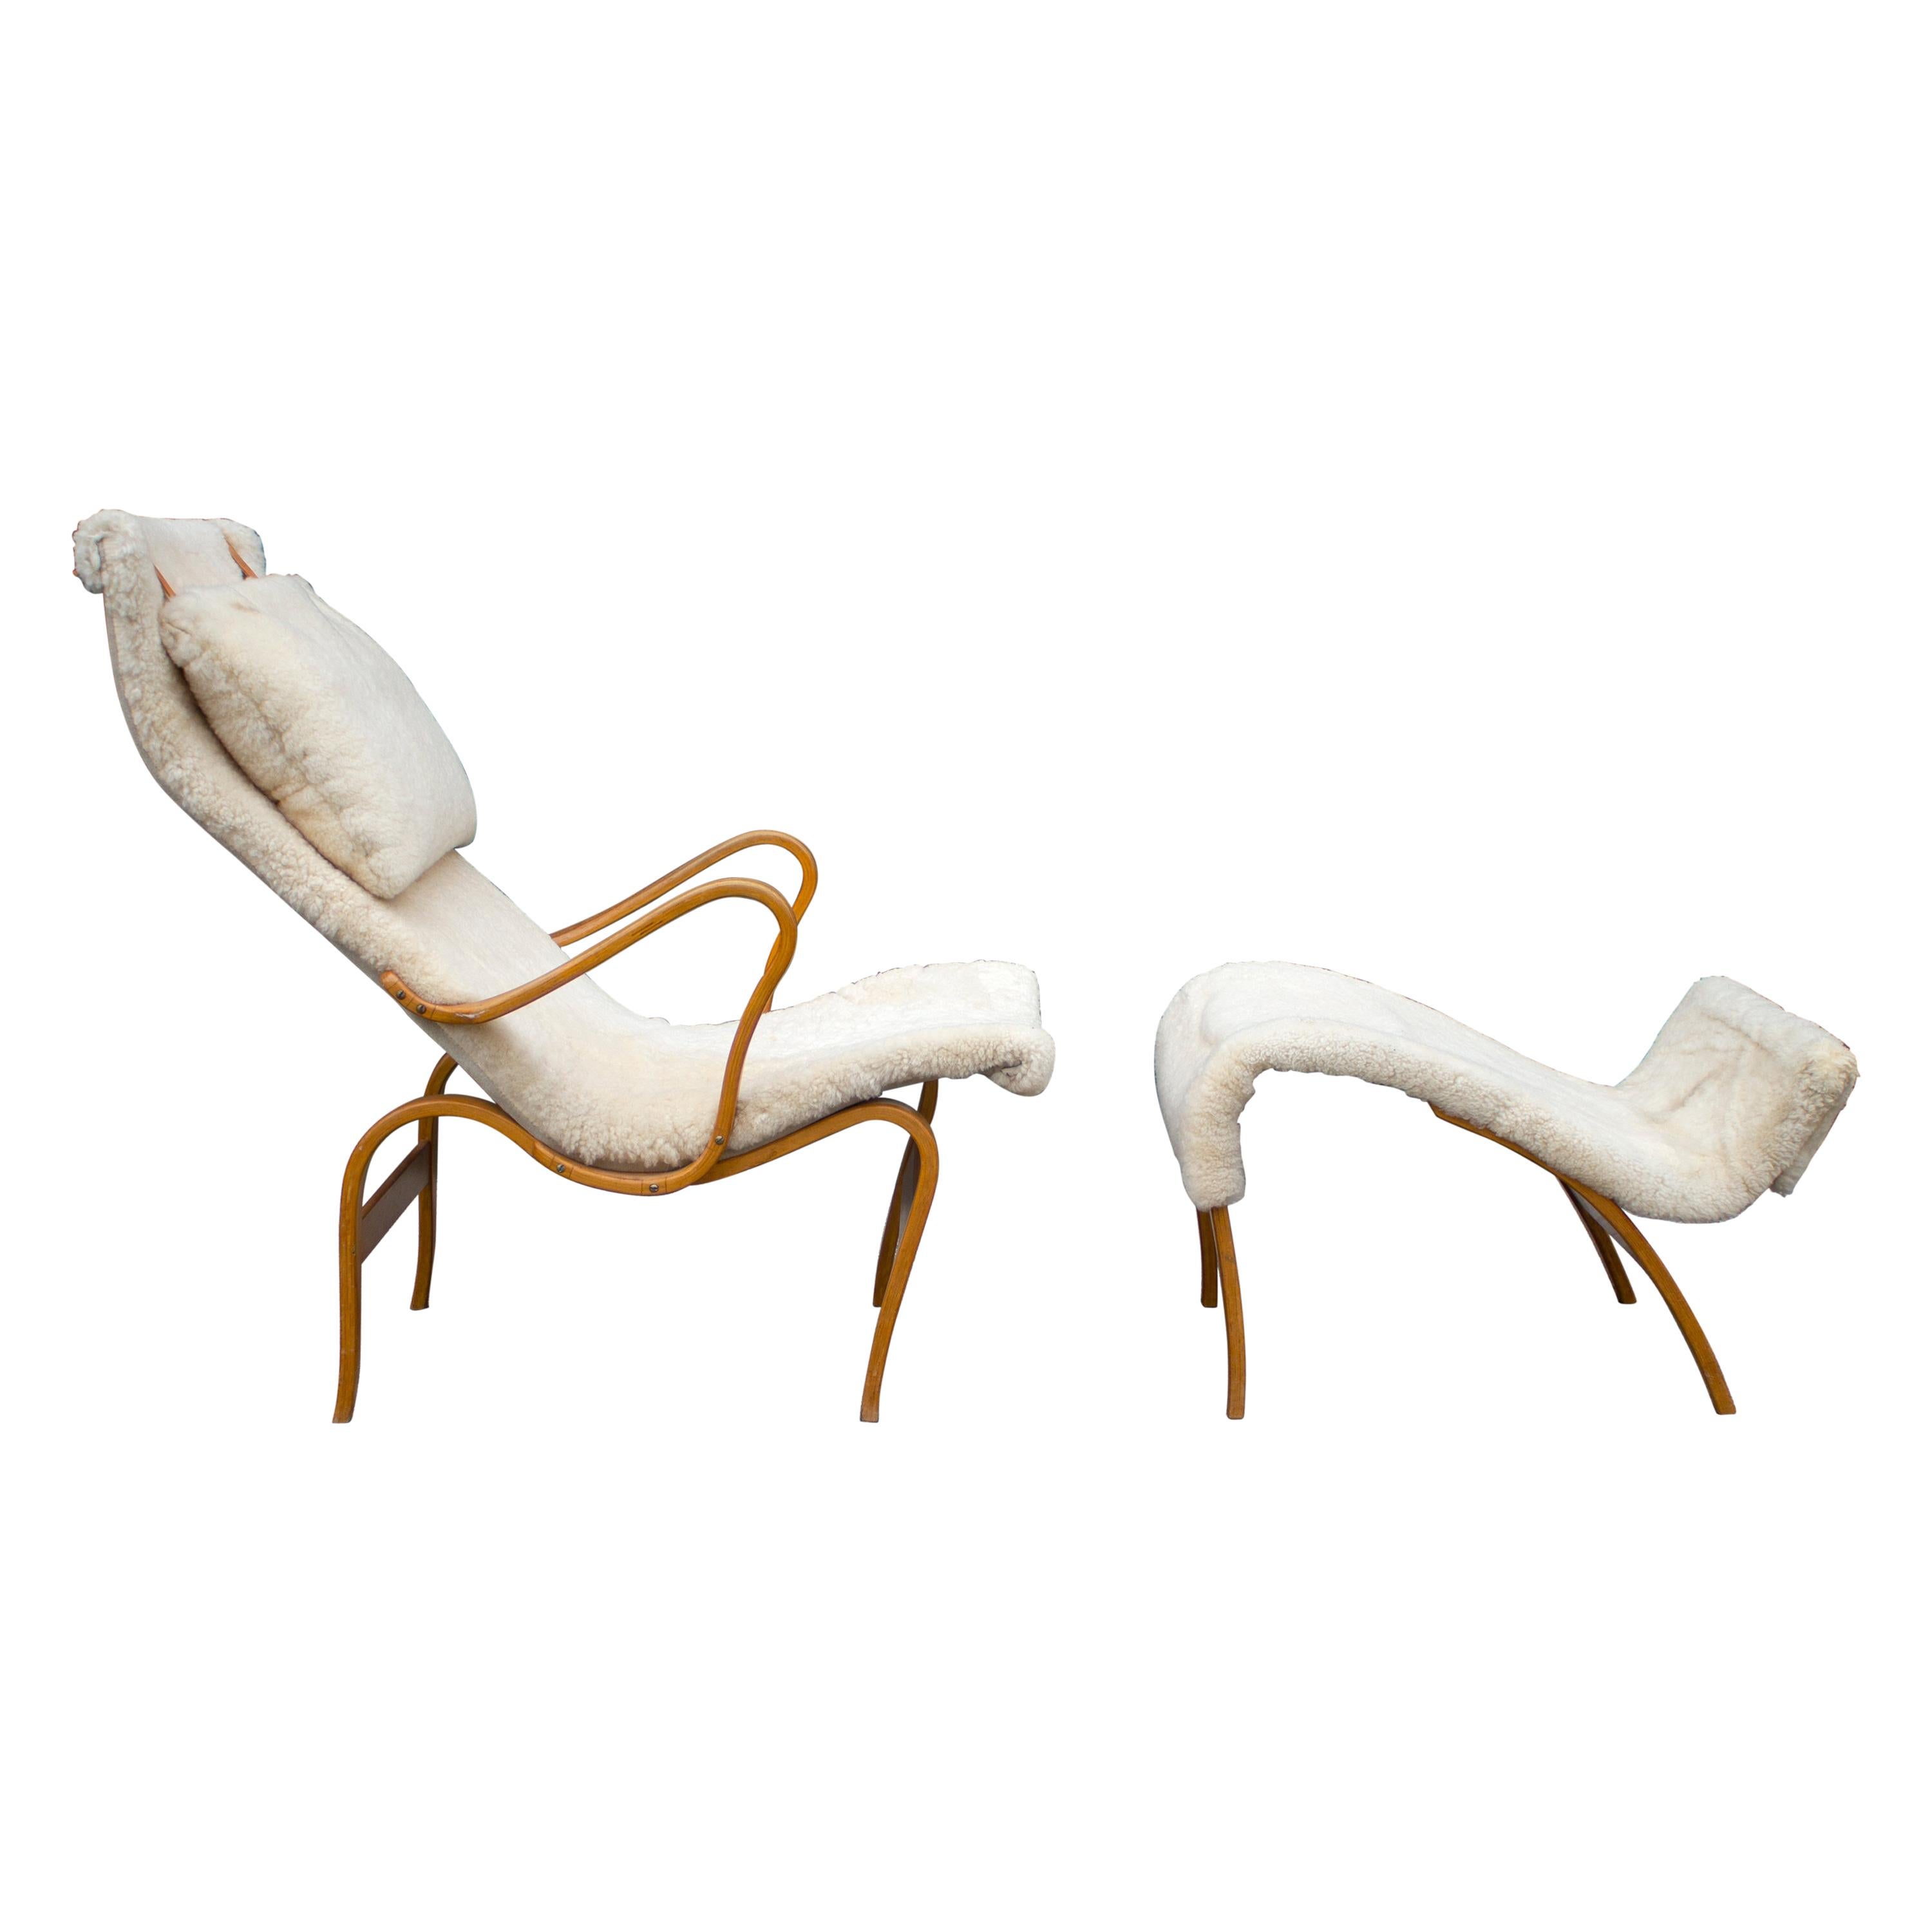 This is an exceptional example of the Bruno Mathsson Pernilla Chair covered in off white sheepskin. The ottoman nests up to the chair to create a chaise lounge. It is the more desirable, earliest production version manufactured by Karl Mathsson and